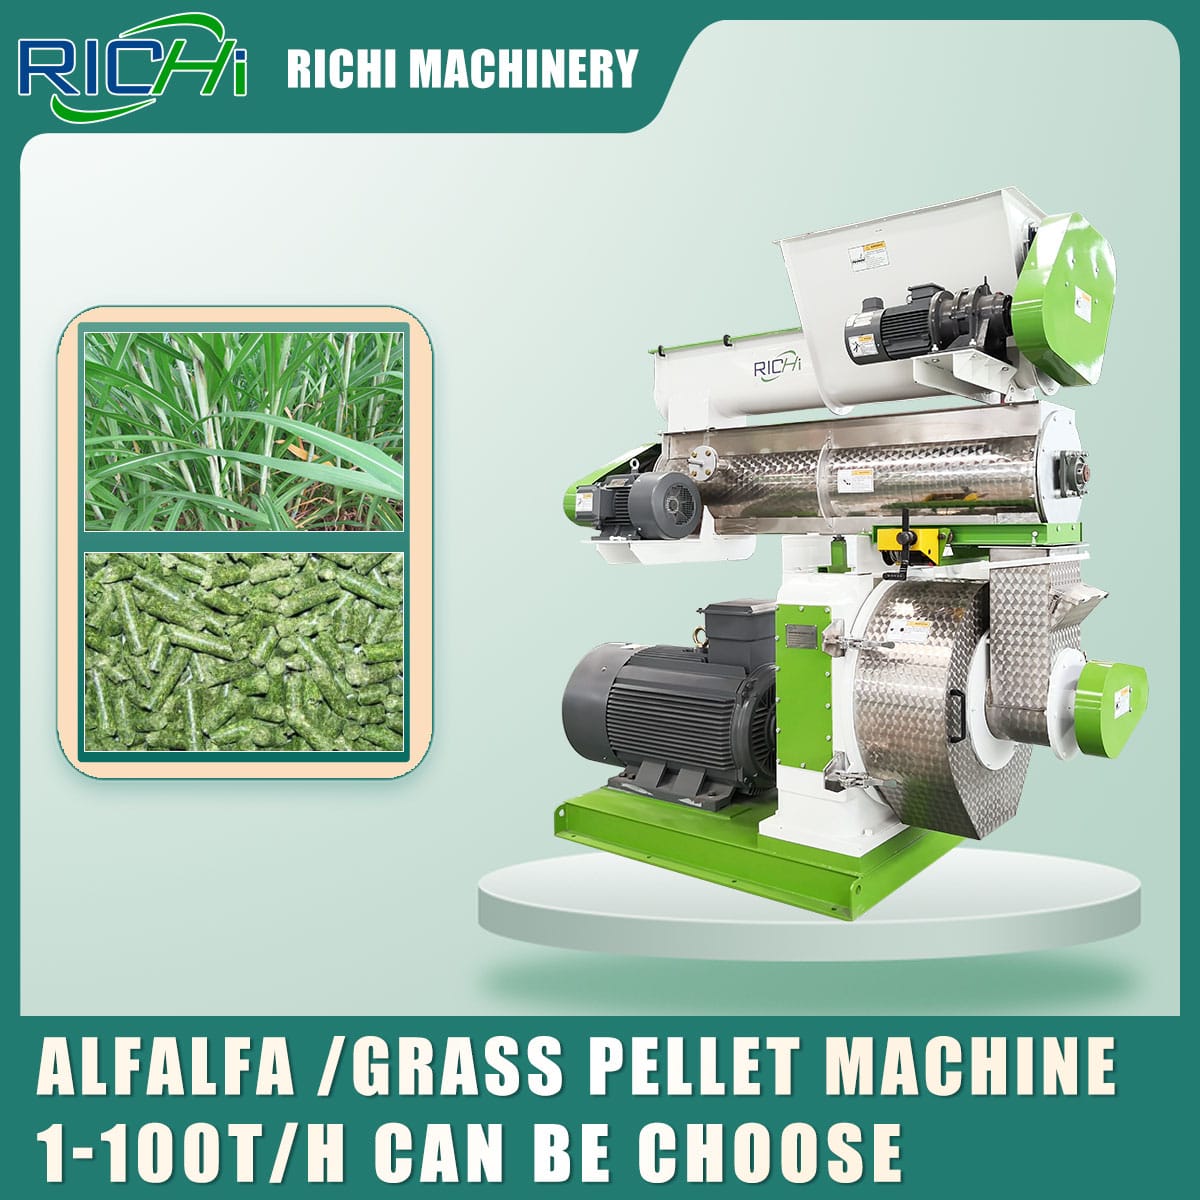 Are you looking for grass pellet machine